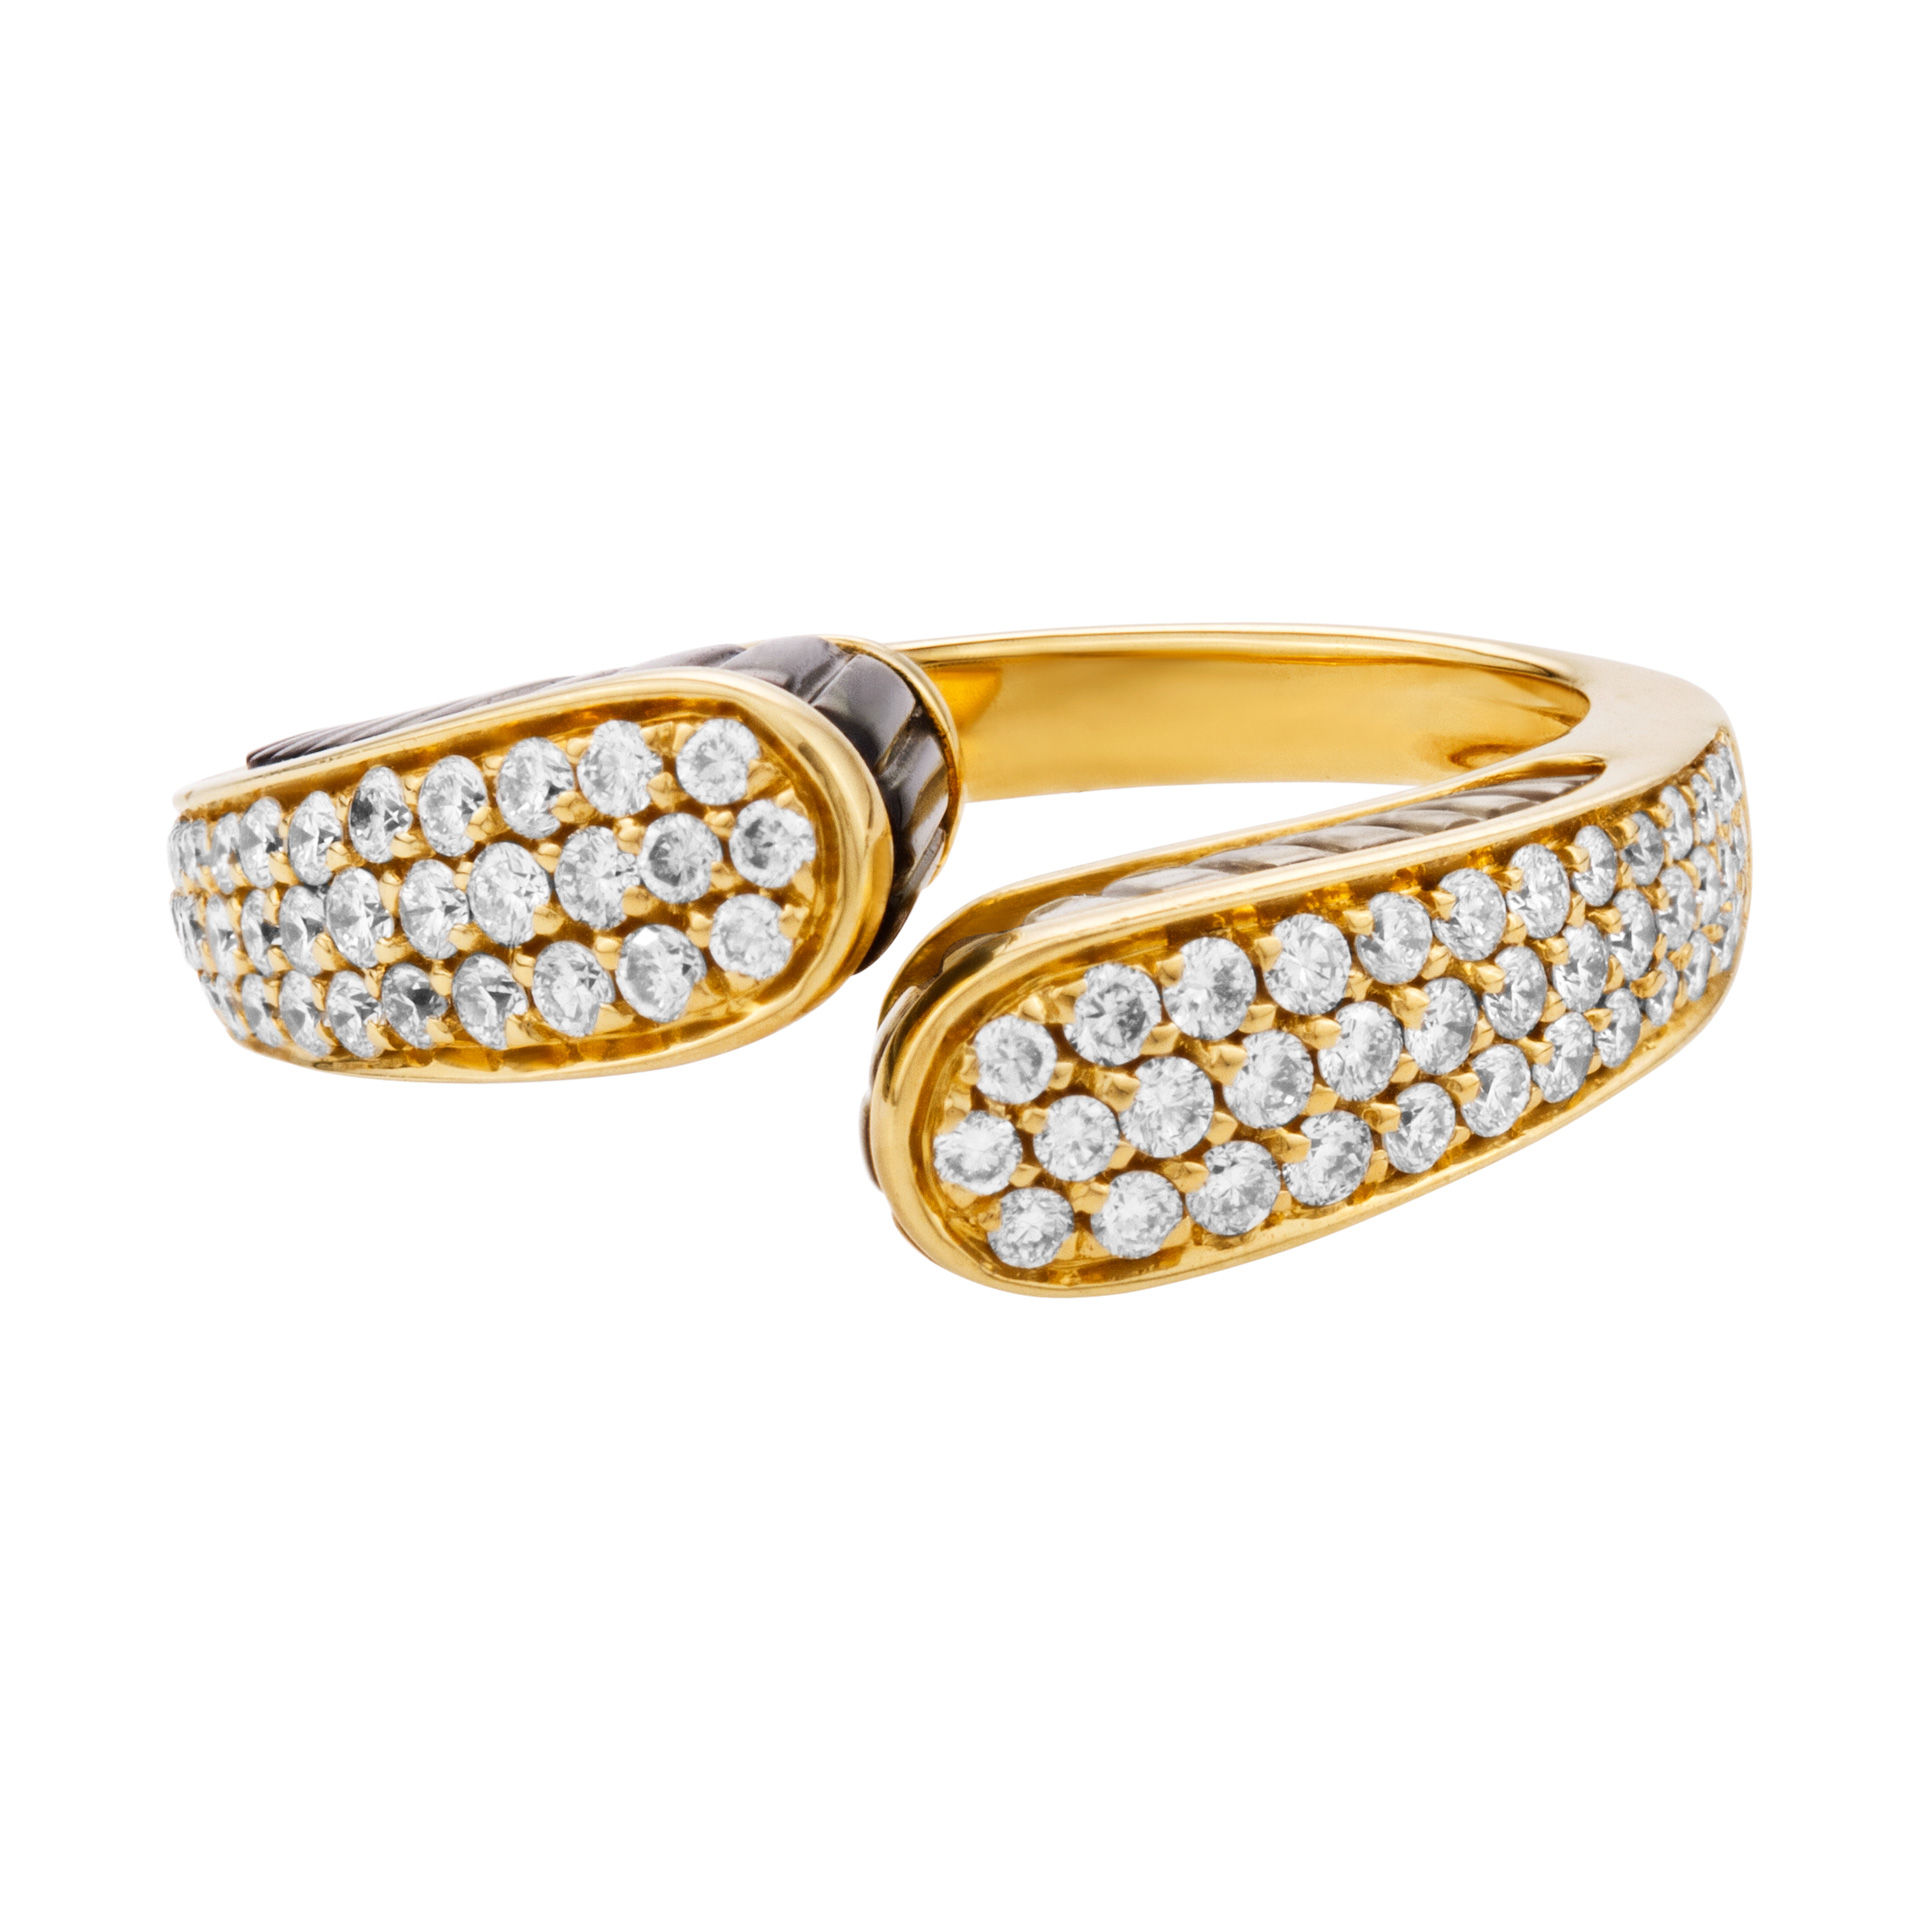 Diamond ring in 18k gold. 0.78cts in diamonds & hand cut 2 cts in colored stones. image 1